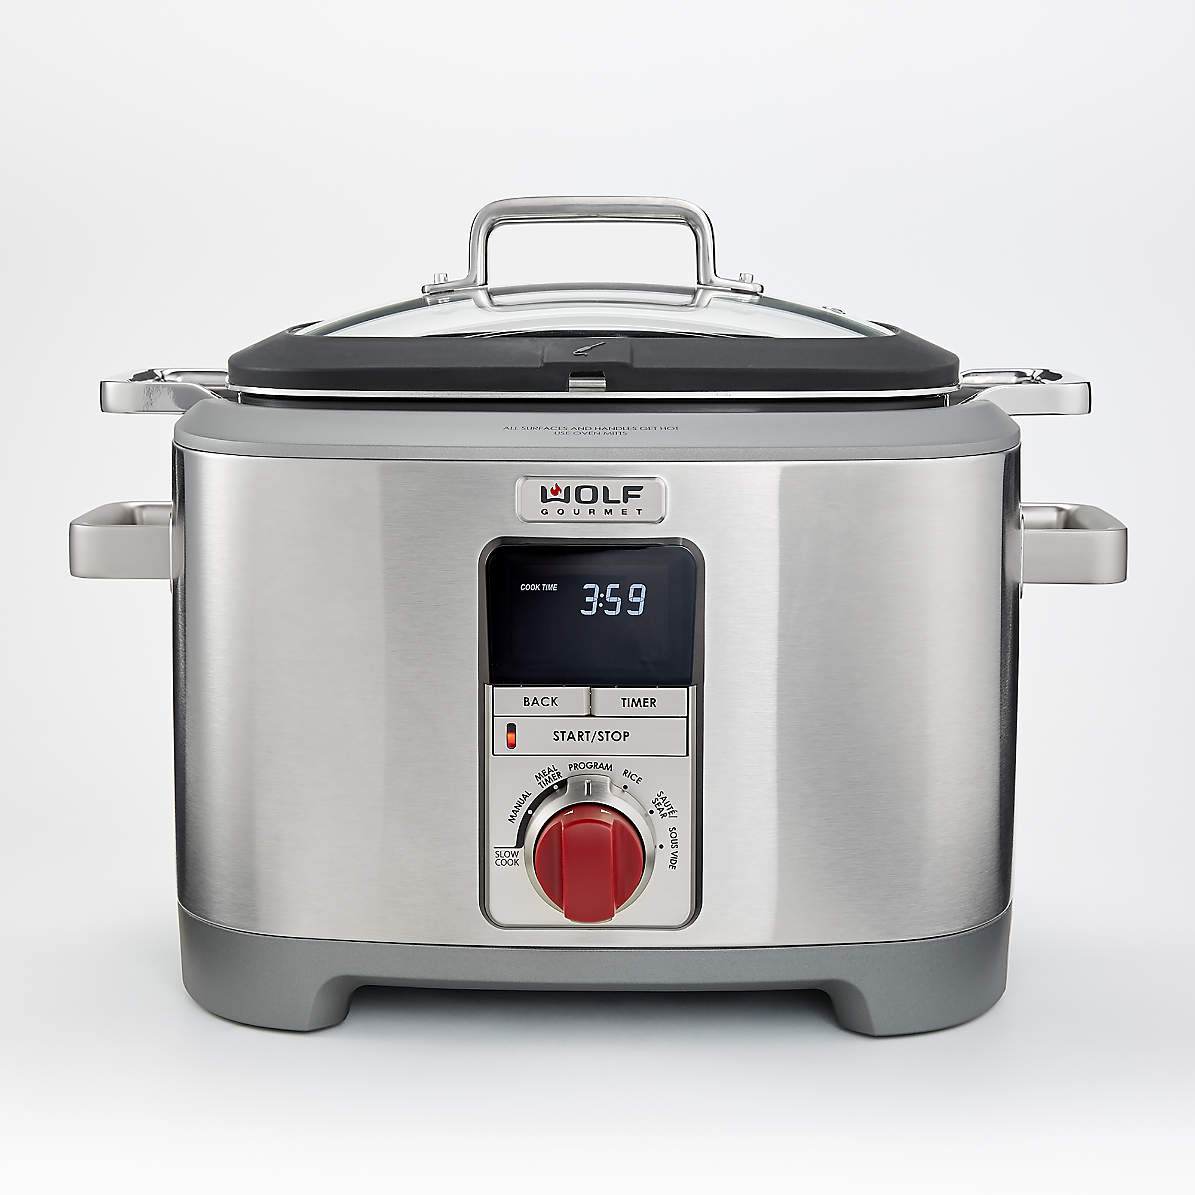 Introducing the Wolf Gourmet Multi Cooker at Williams Sonoma 